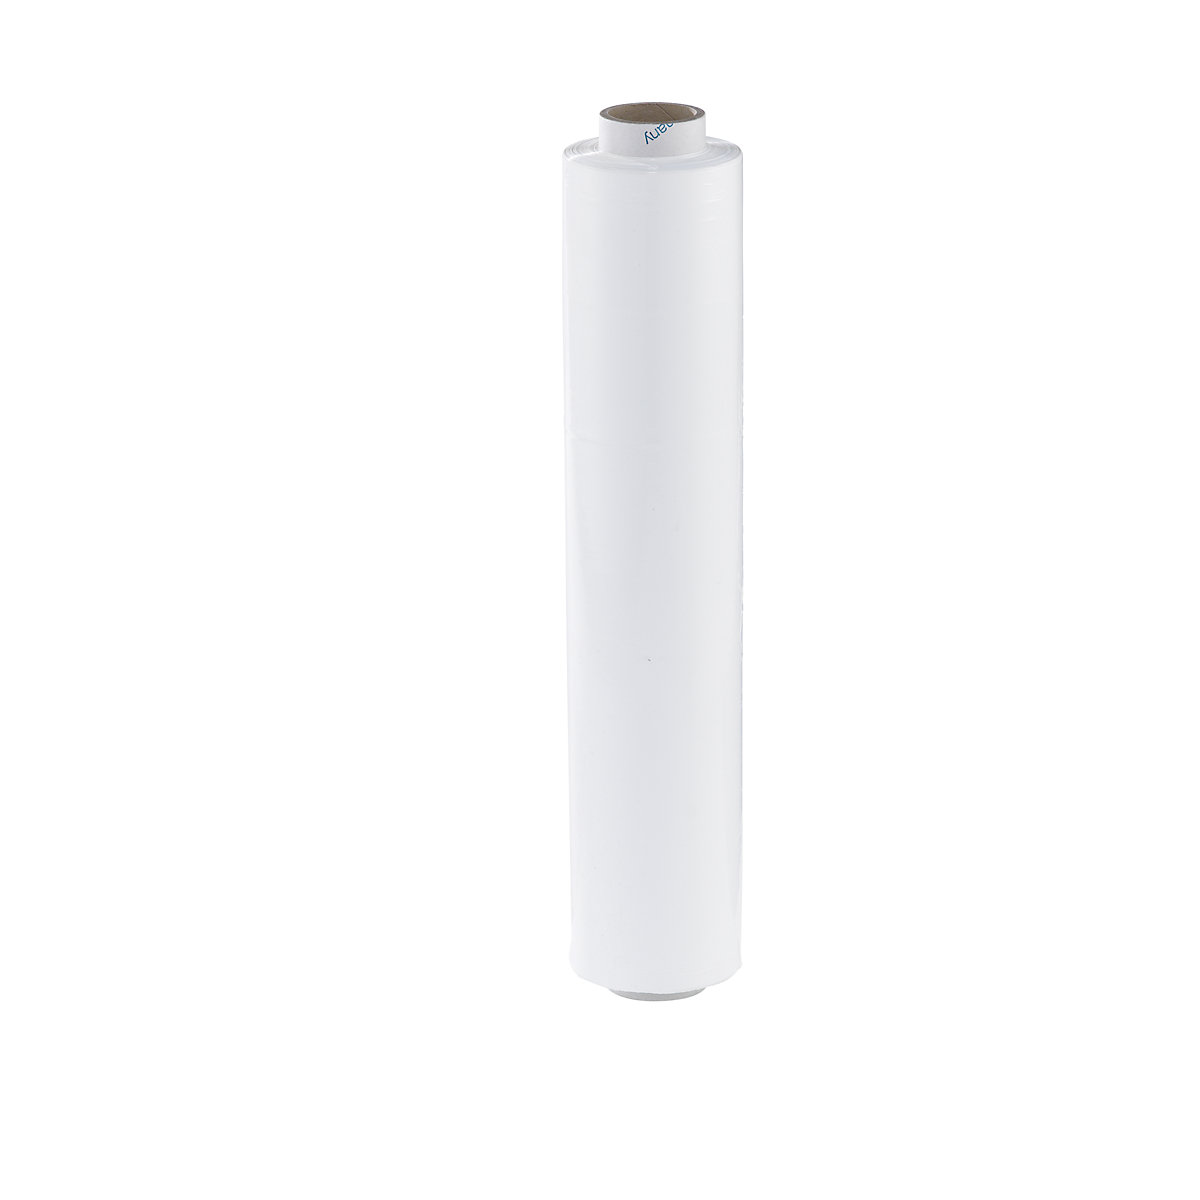 PE manual stretch film, pack of 6 rolls, width 500 mm, film thickness 23 µm, white, 4+ packs-1